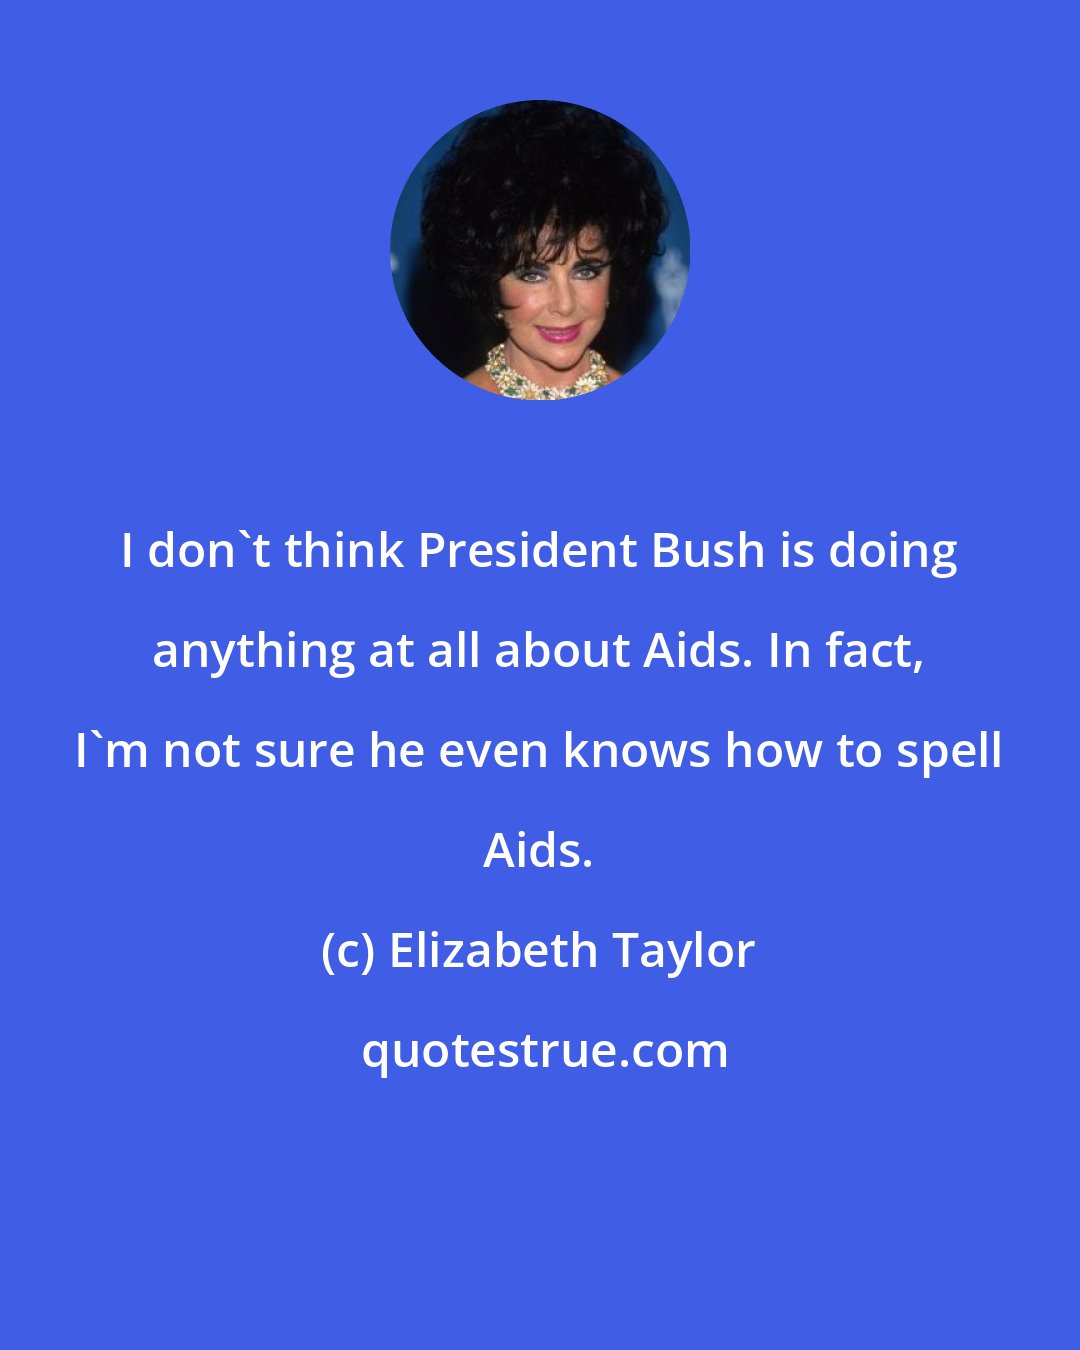 Elizabeth Taylor: I don't think President Bush is doing anything at all about Aids. In fact, I'm not sure he even knows how to spell Aids.